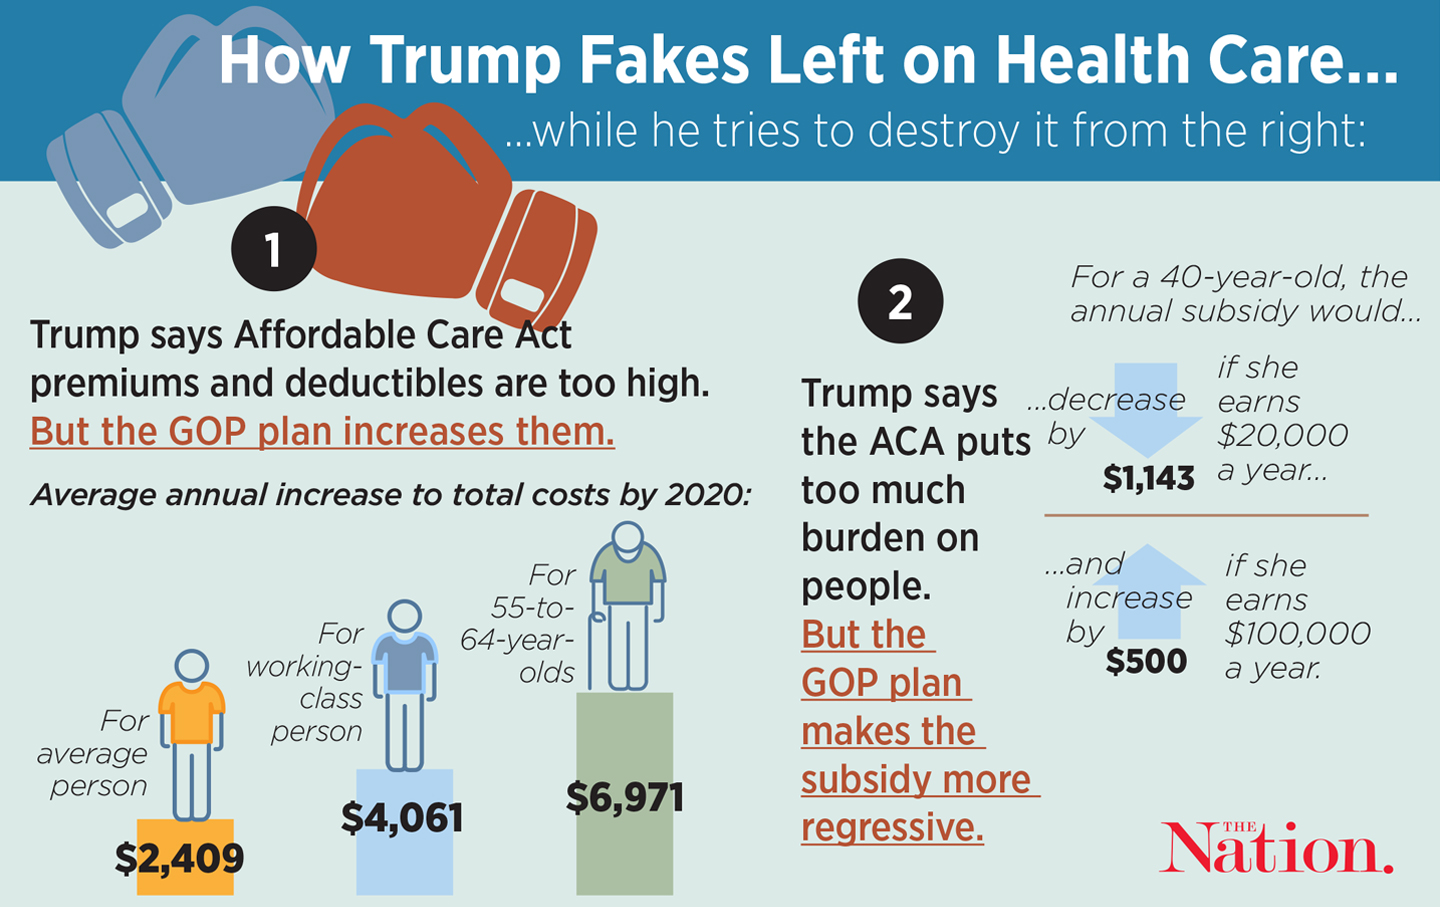 The Truth About the GOP Health-Care Plan